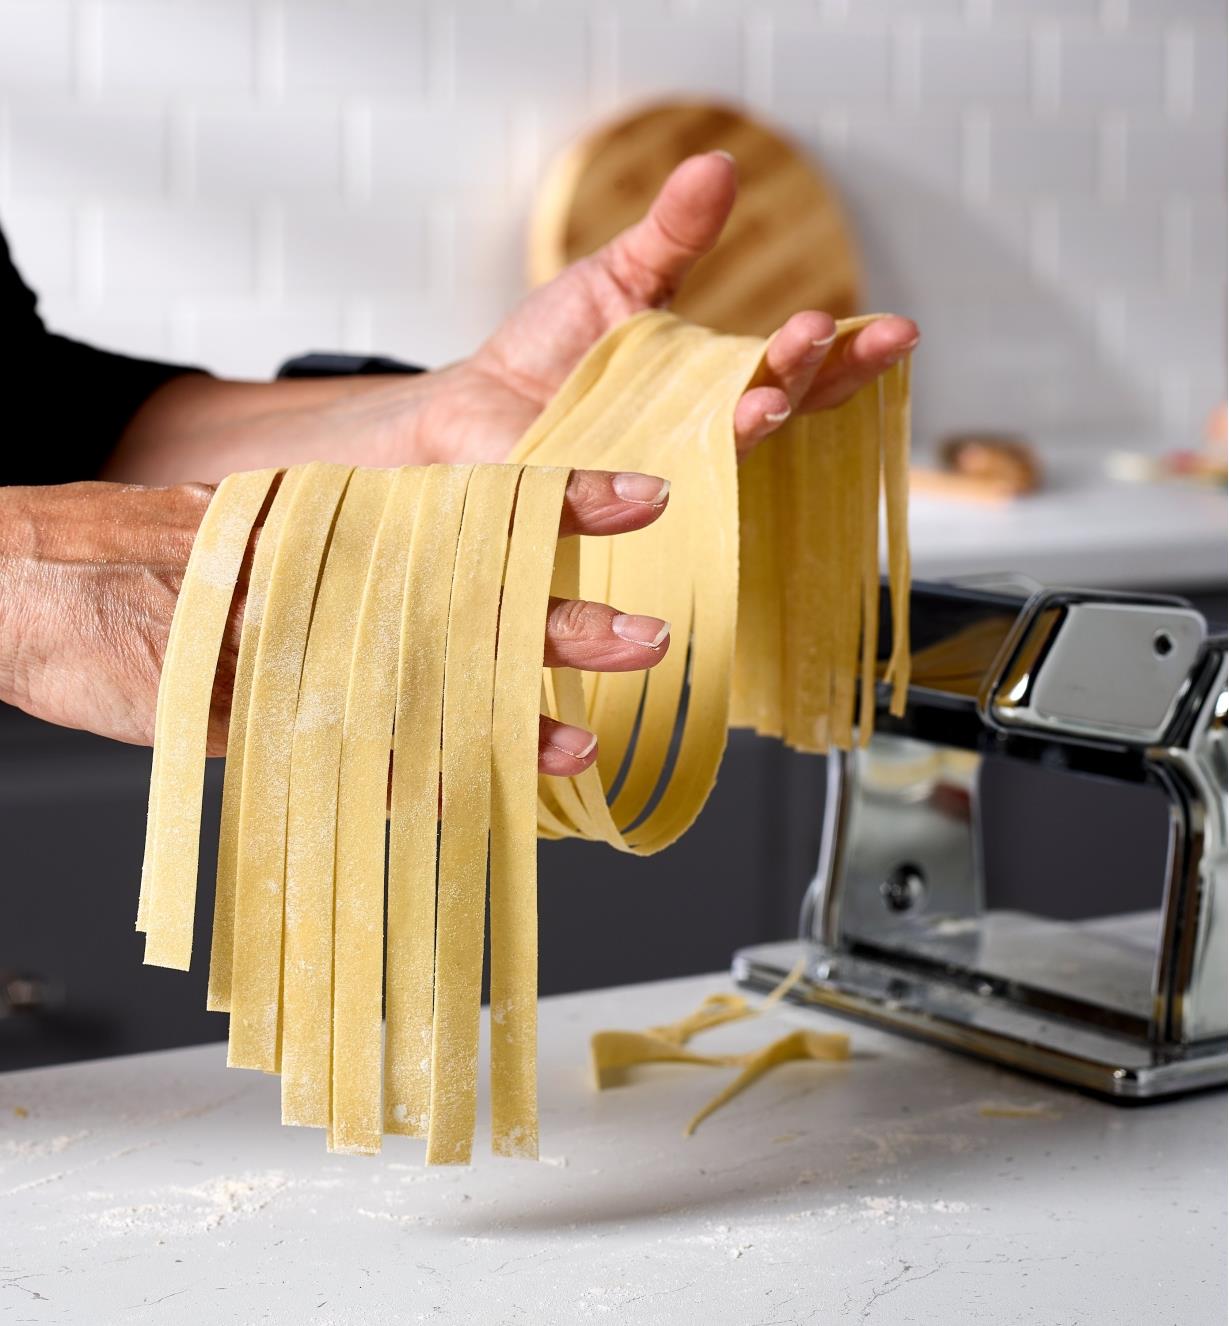 A cook holds lasagnette noodles made with a Marcato pasta machine and a lasagnette cutter attachment